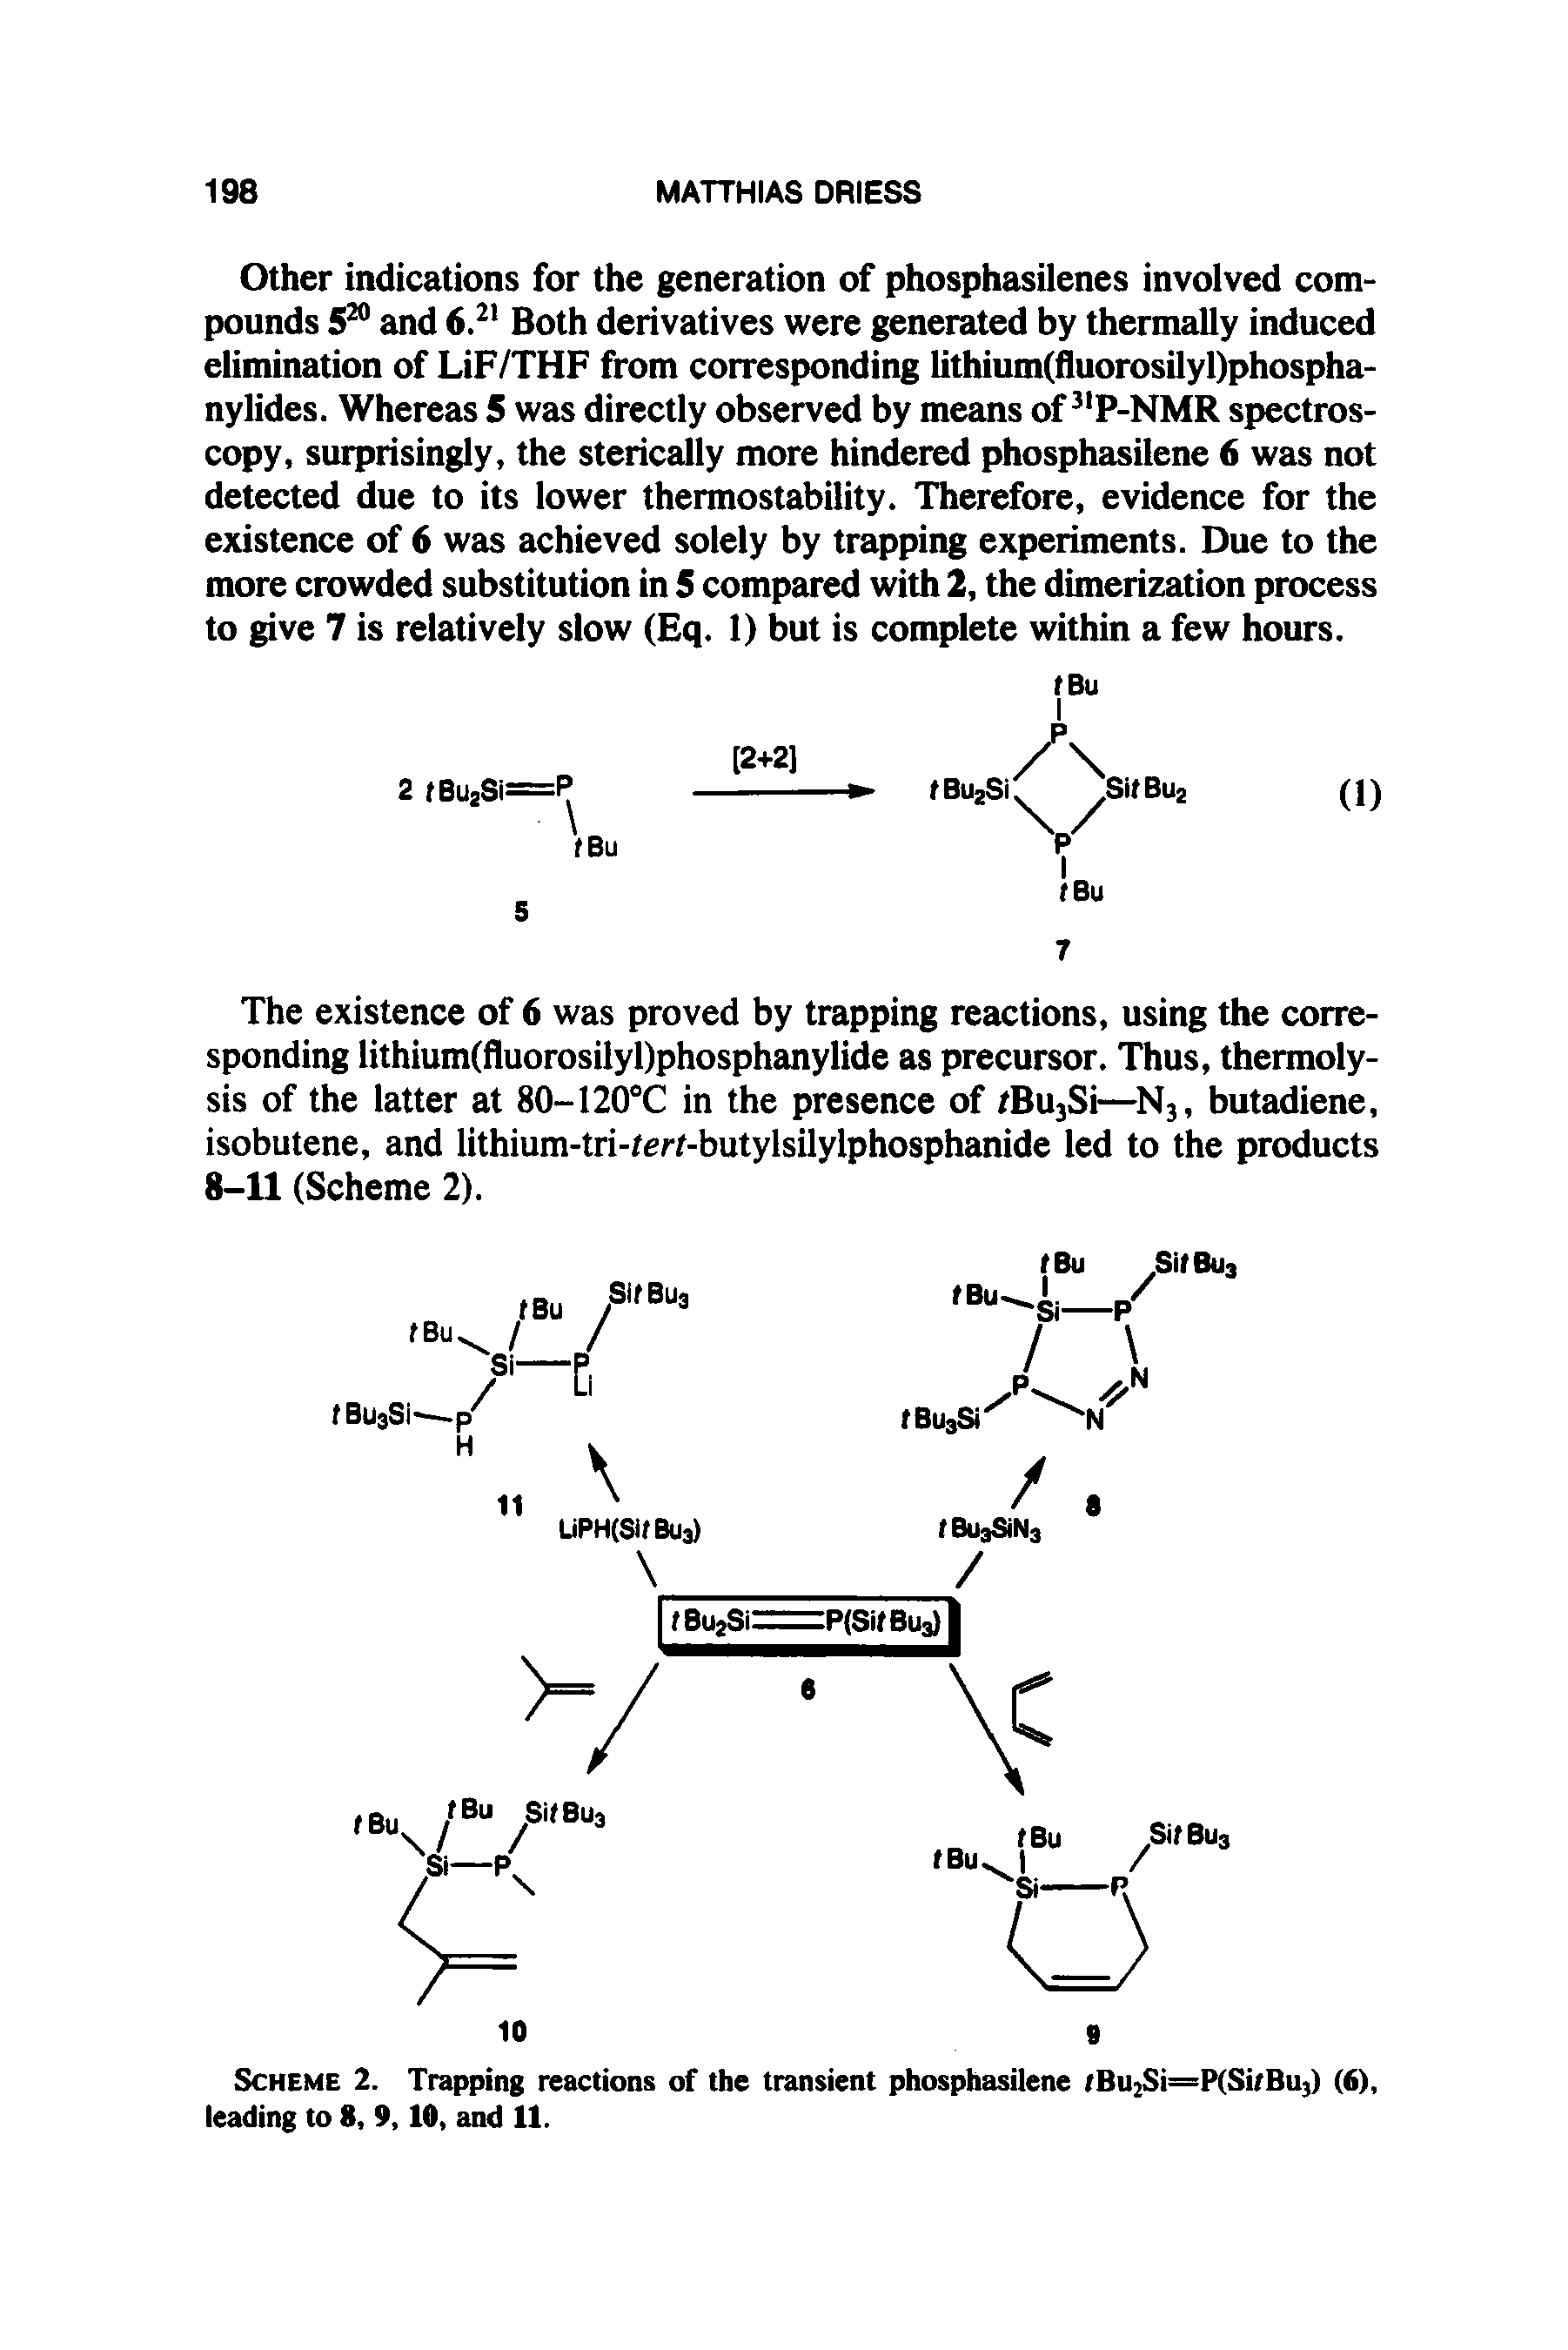 Scheme 2. Trapping reactions of the transient phosphasilene /Bu2Si=P(Si/Bu3) (6), leading to 8, 9,10, and 11.